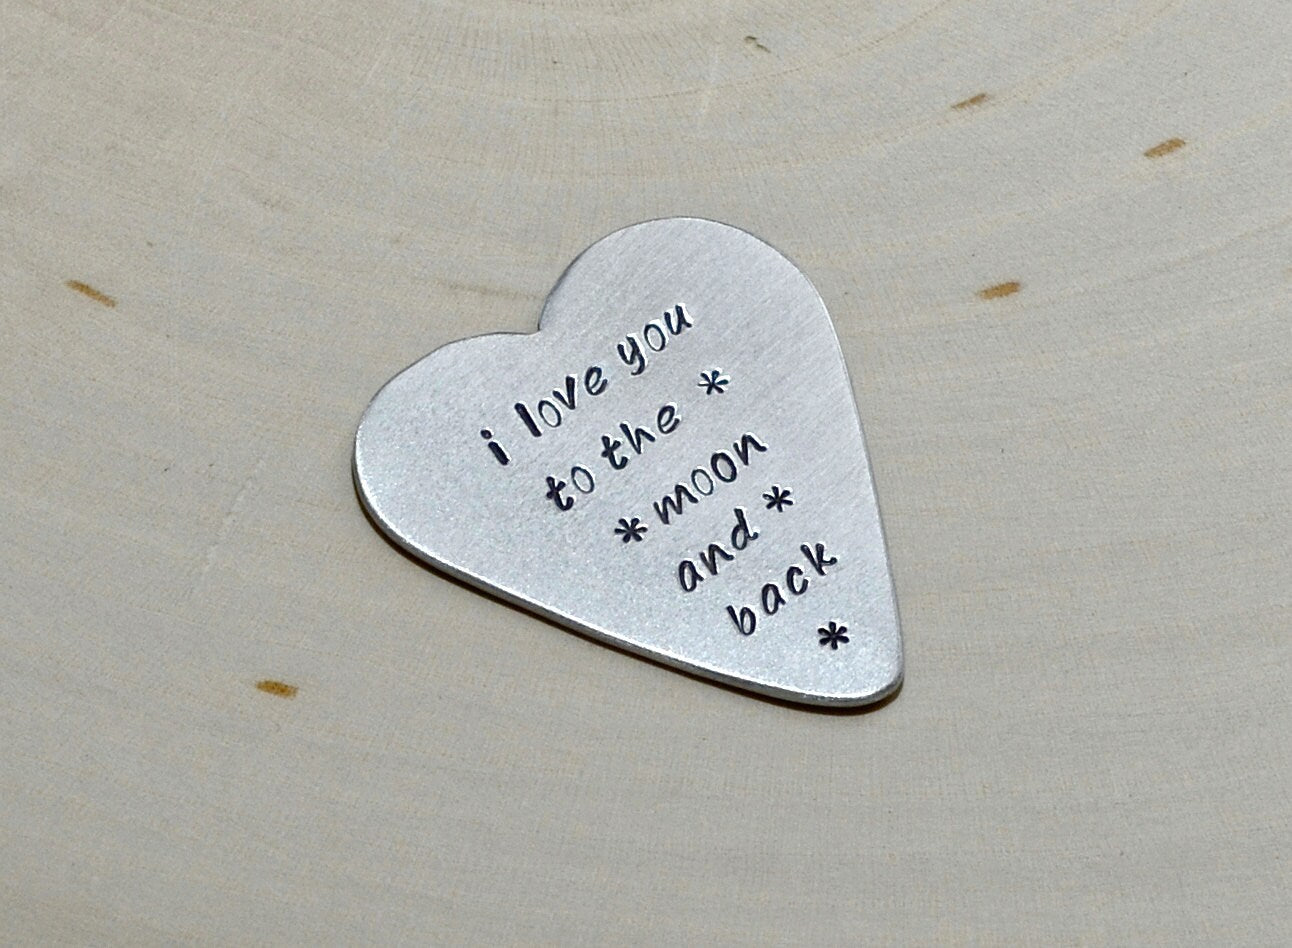 Love You To The Moon and Back Aluminum Heart Guitar Pick